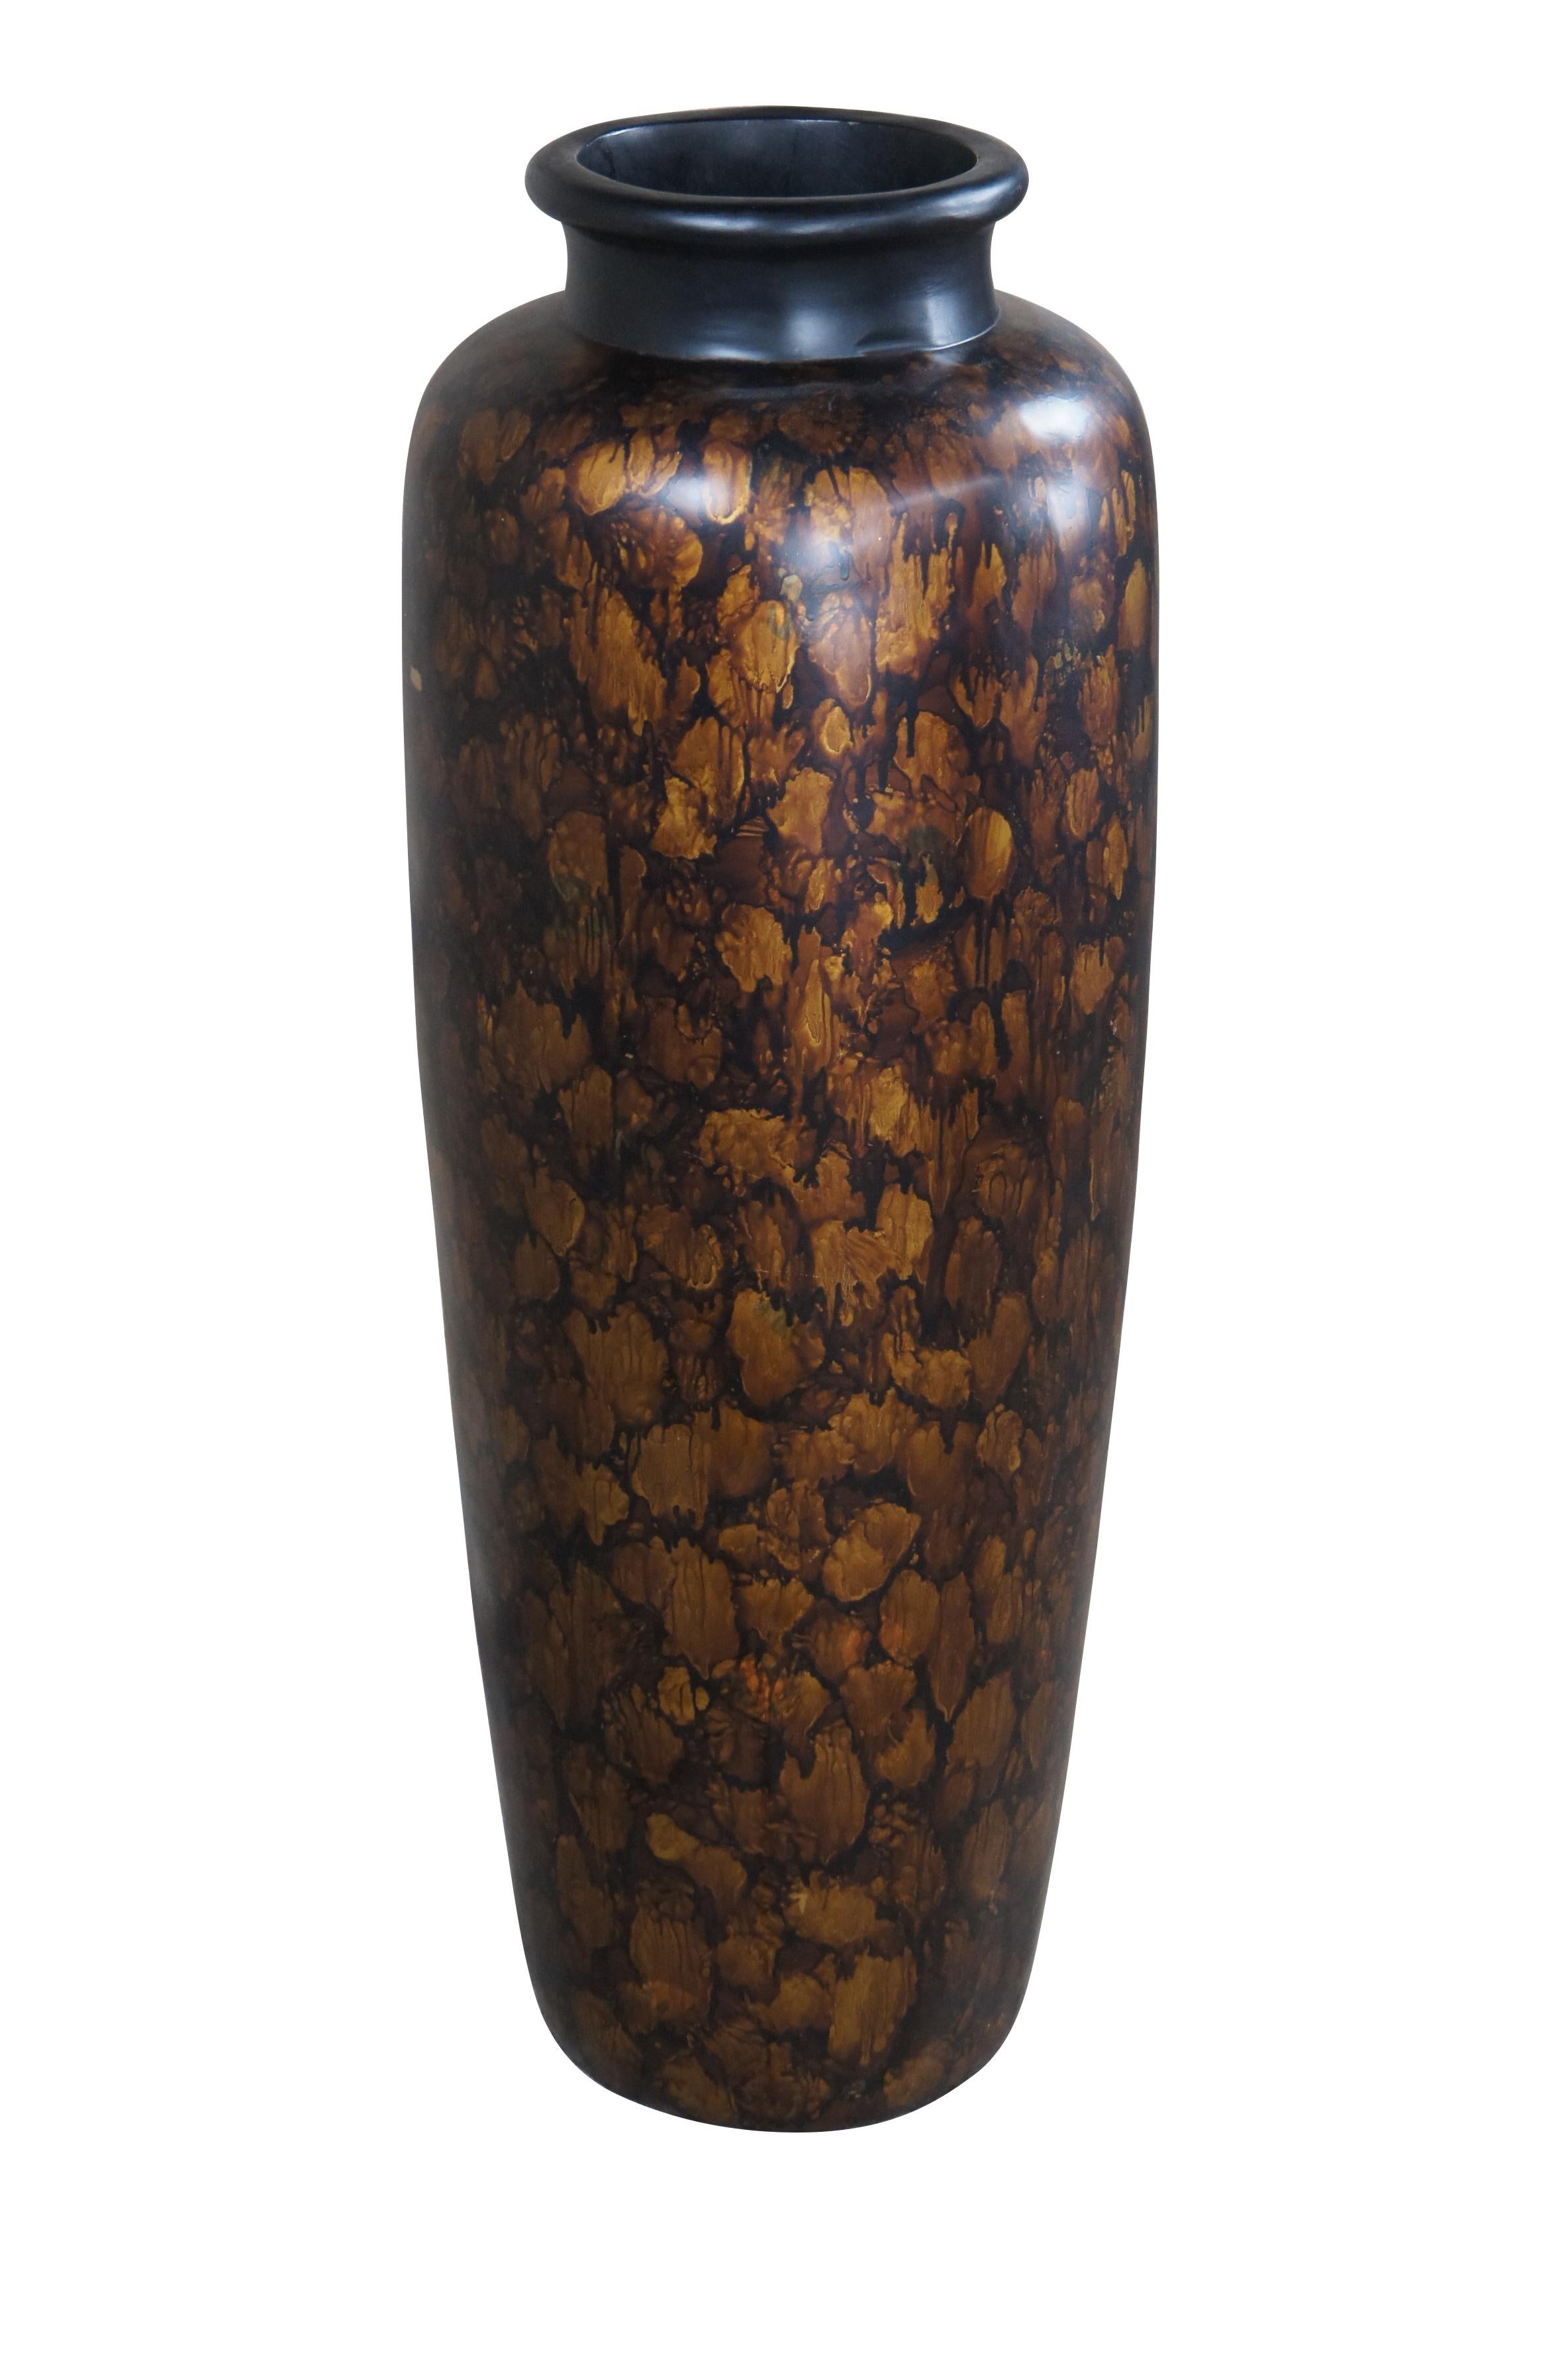 Vintage Austin Adelina tall composite / resin floor urn / vessel shaped vase, mottled with deep brown and metallic gold / amber. 

Dimensions:
13